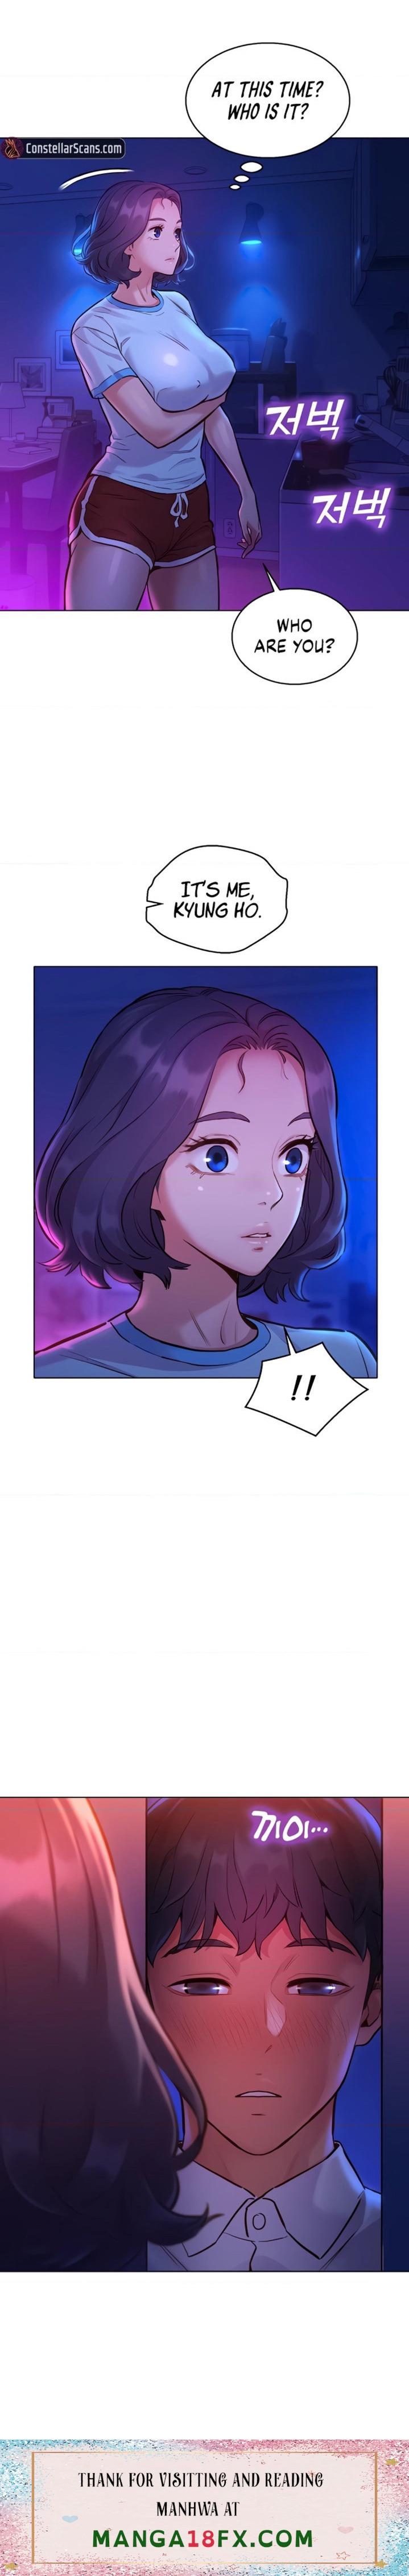 Let’s Hang Out from Today - Chapter 5 Page 26